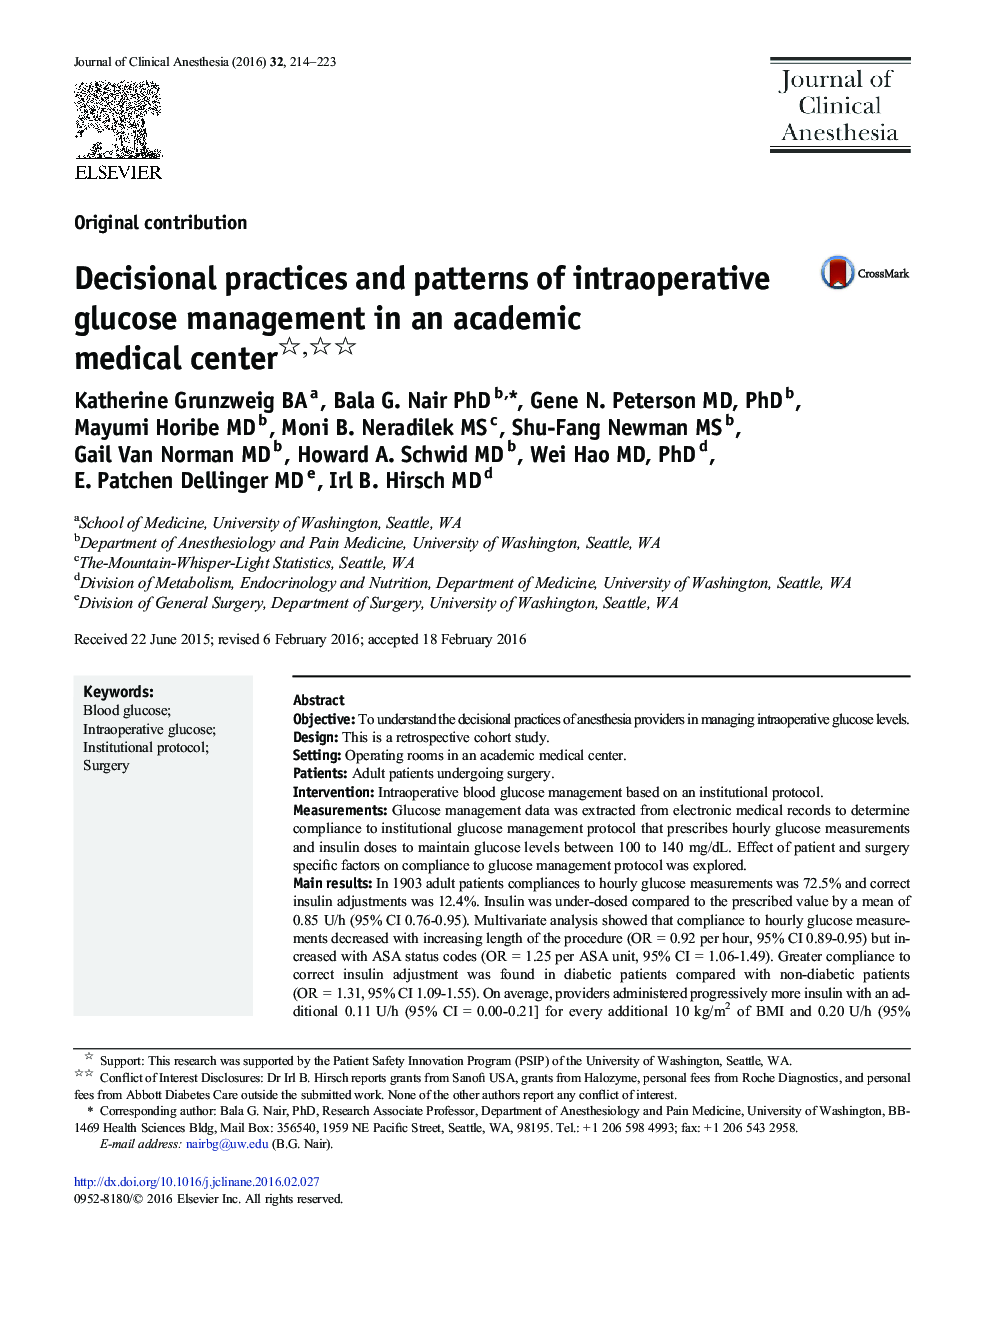 Decisional practices and patterns of intraoperative glucose management in an academic medical center